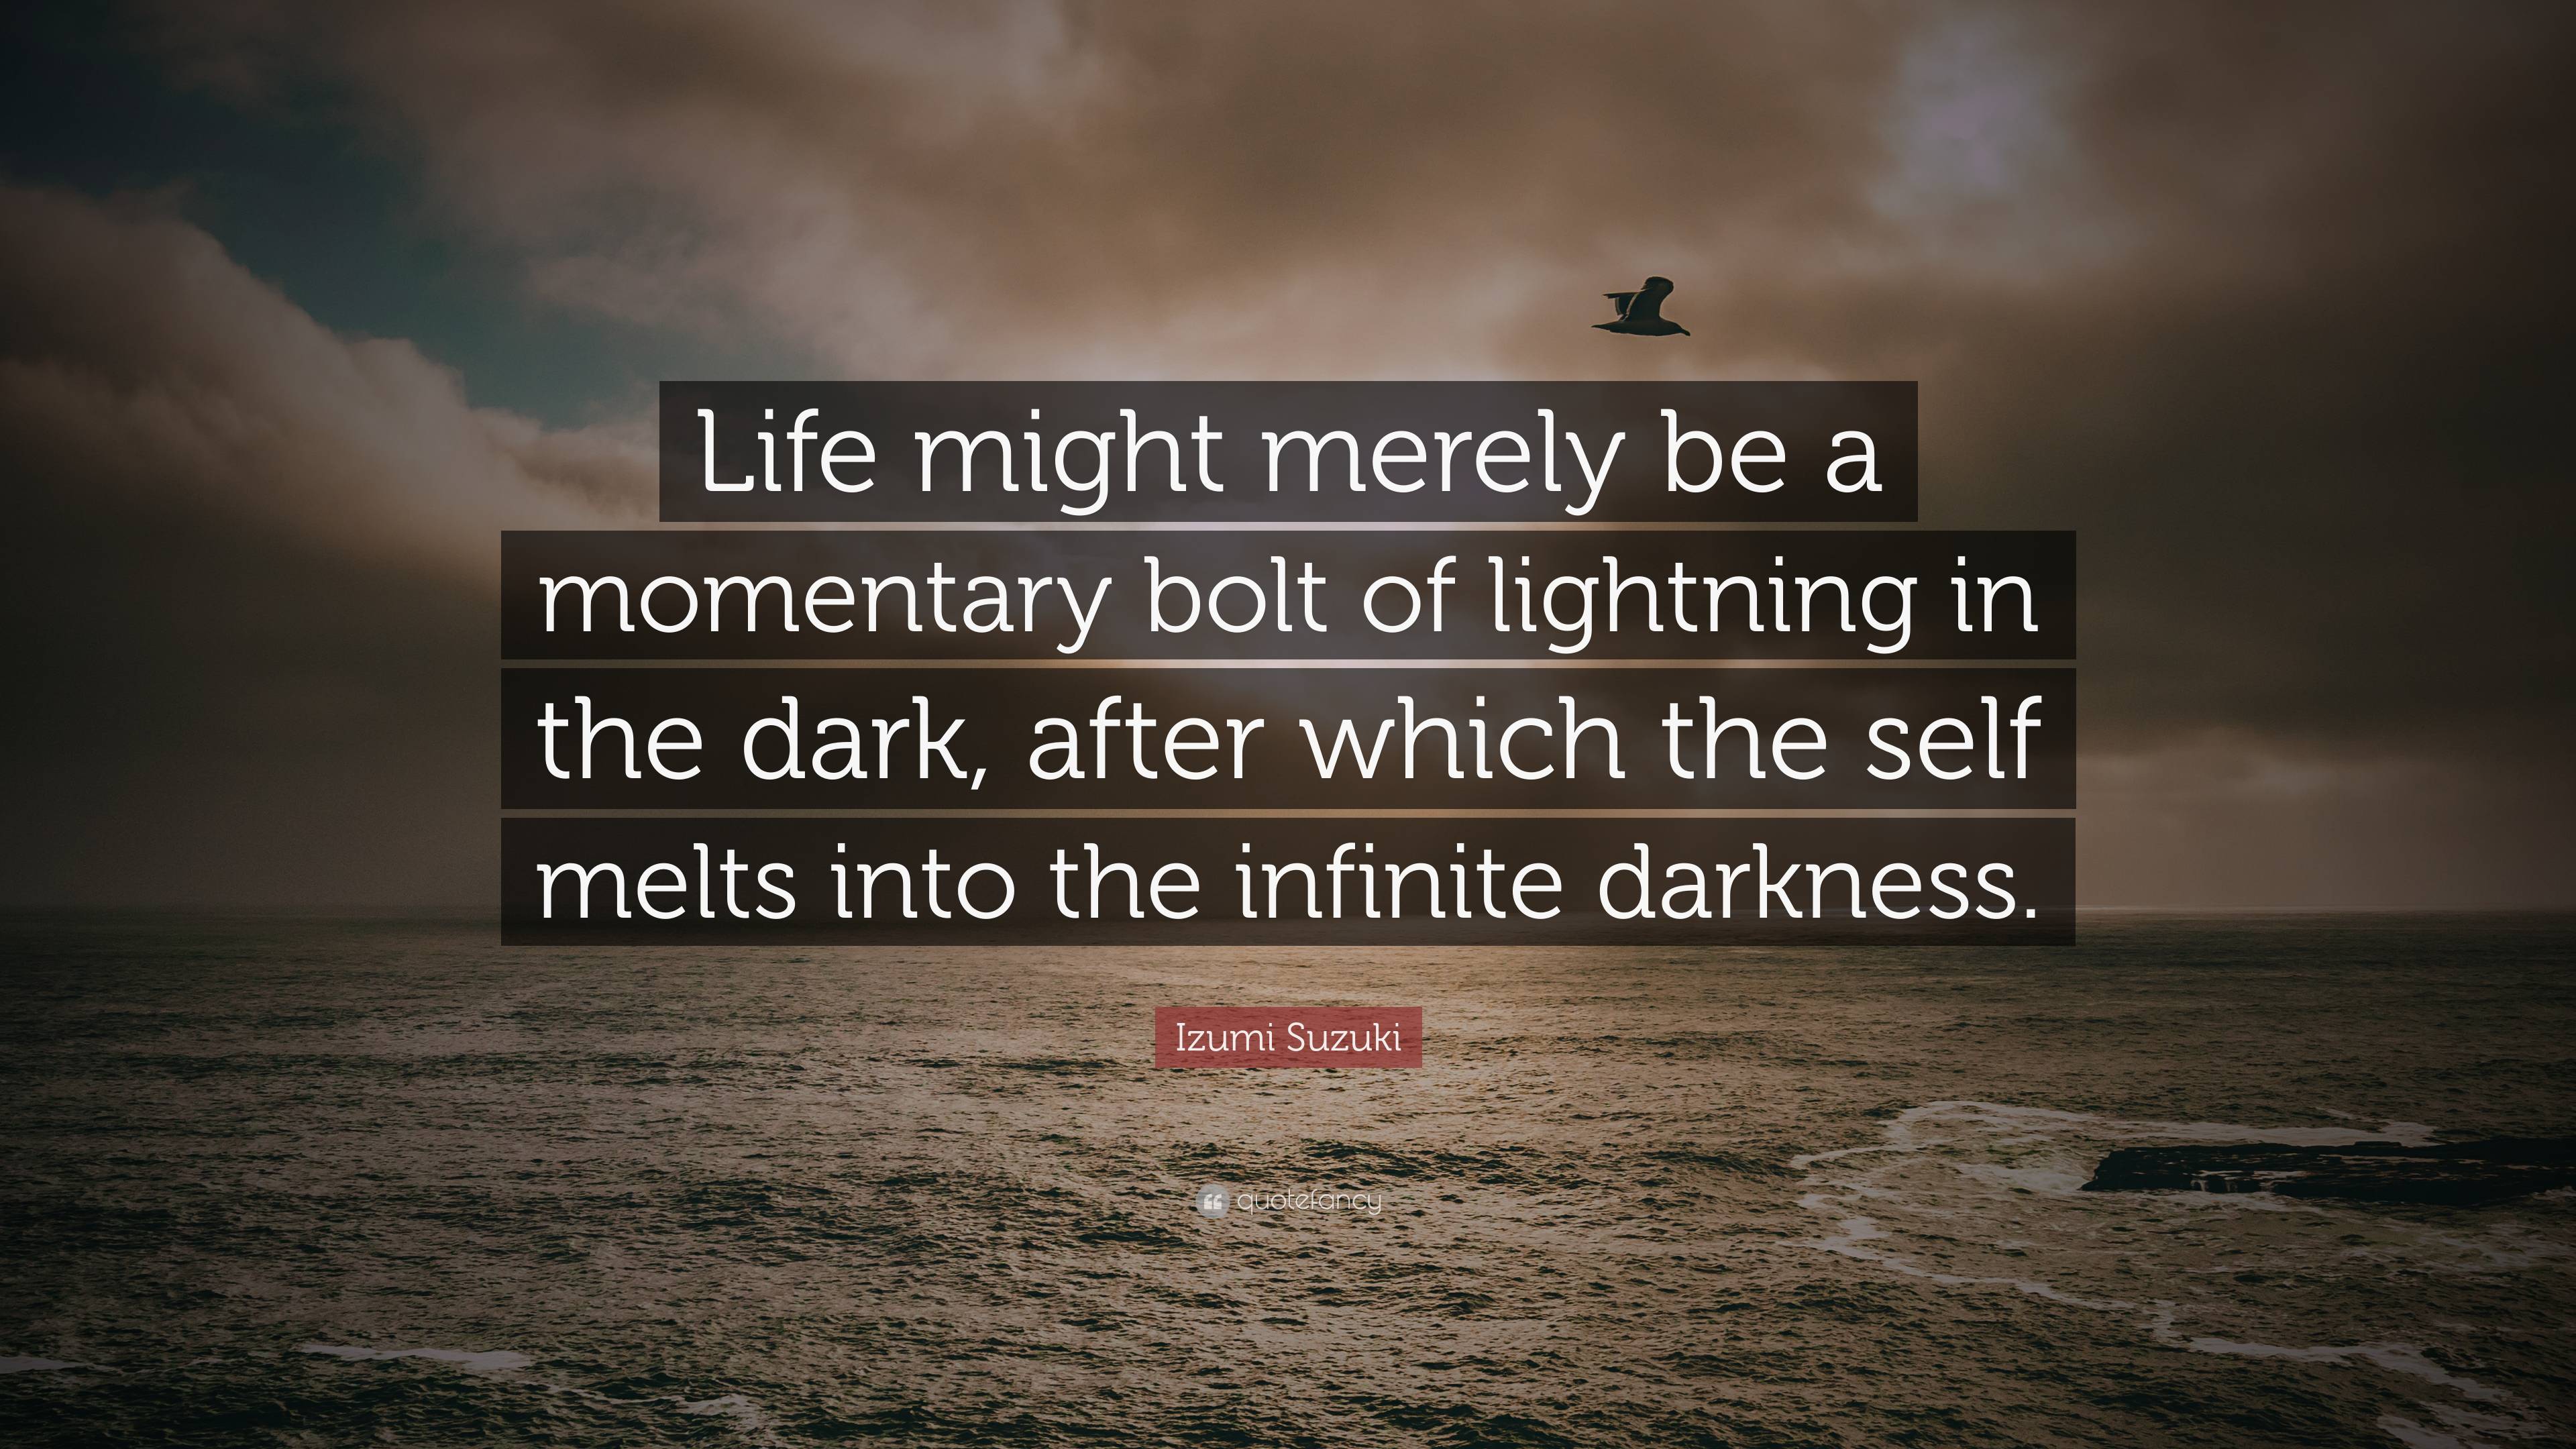 Izumi Suzuki Quote: “Life might merely be a momentary bolt of lightning ...